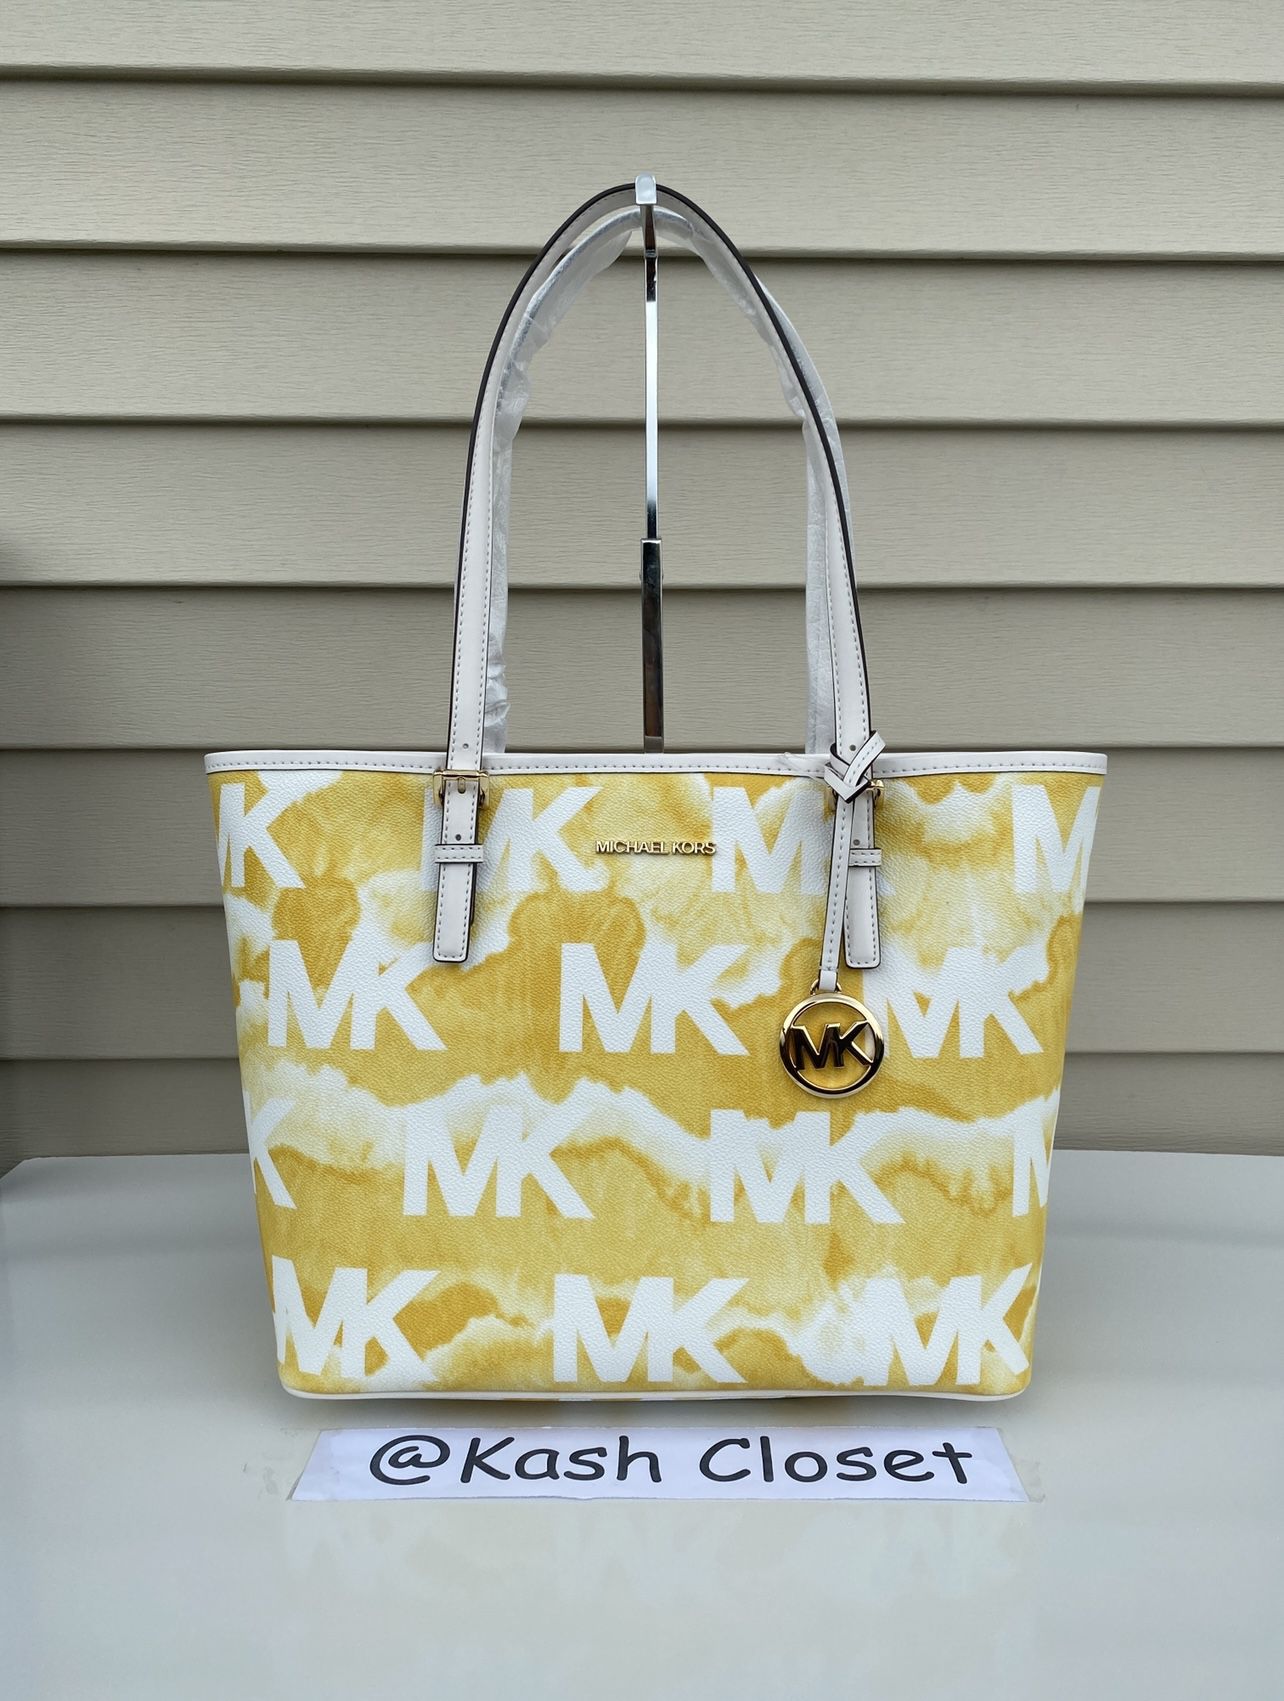 Michael Kors JST medium carryall tote logo printed Purse Bag Buttercup  Multi for Sale in Lakeville, MN - OfferUp